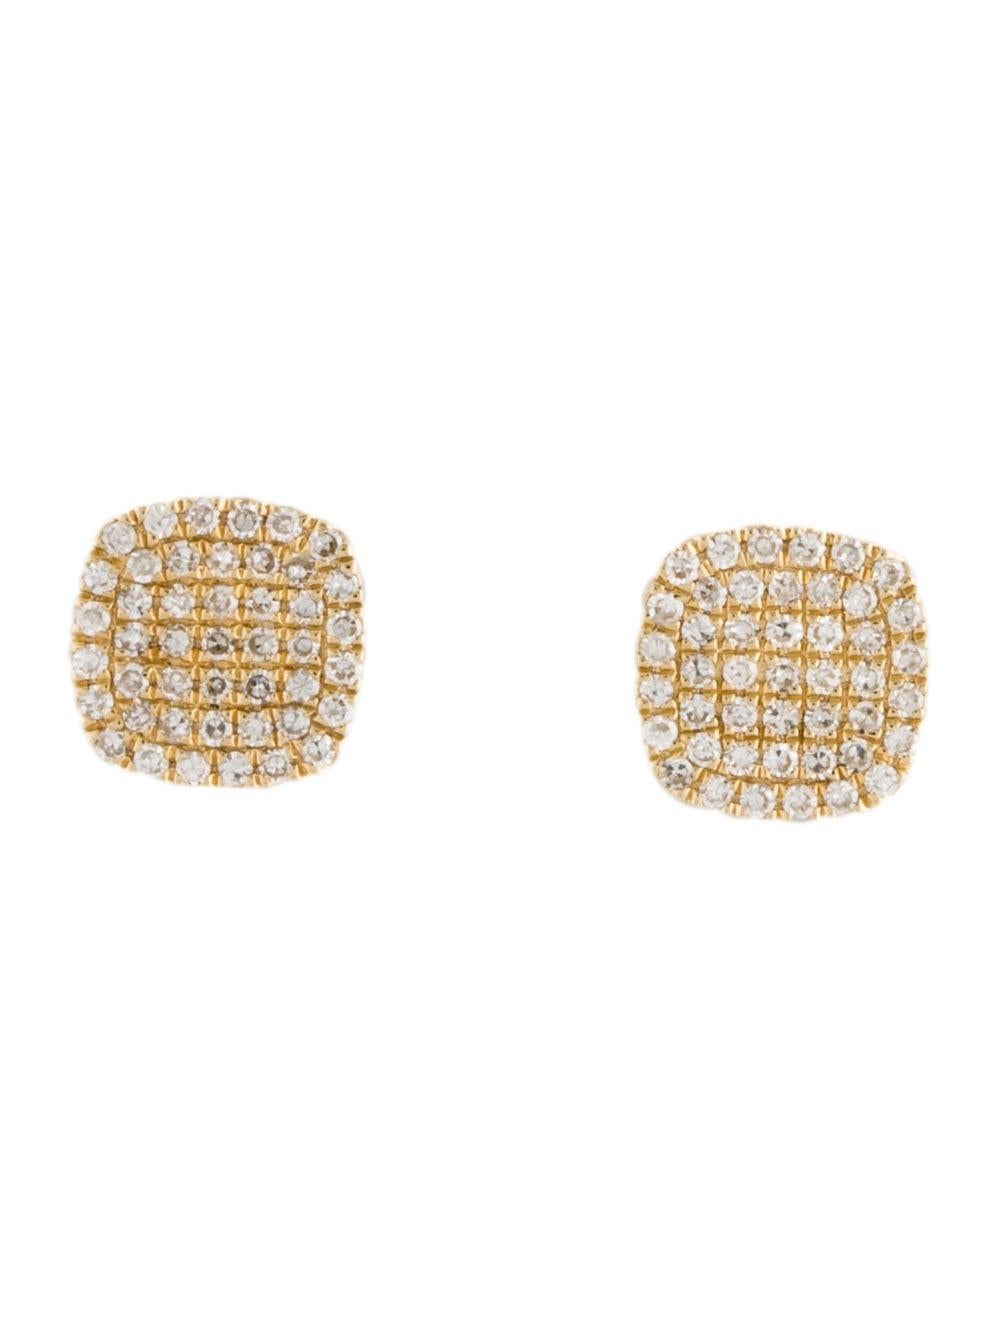 Quality Earrings Set: Made from real 14k gold and 90 white sparkling diamonds approximately 0.20 ct. Certified diamonds, available in pink, white, and yellow, - Length 0.46